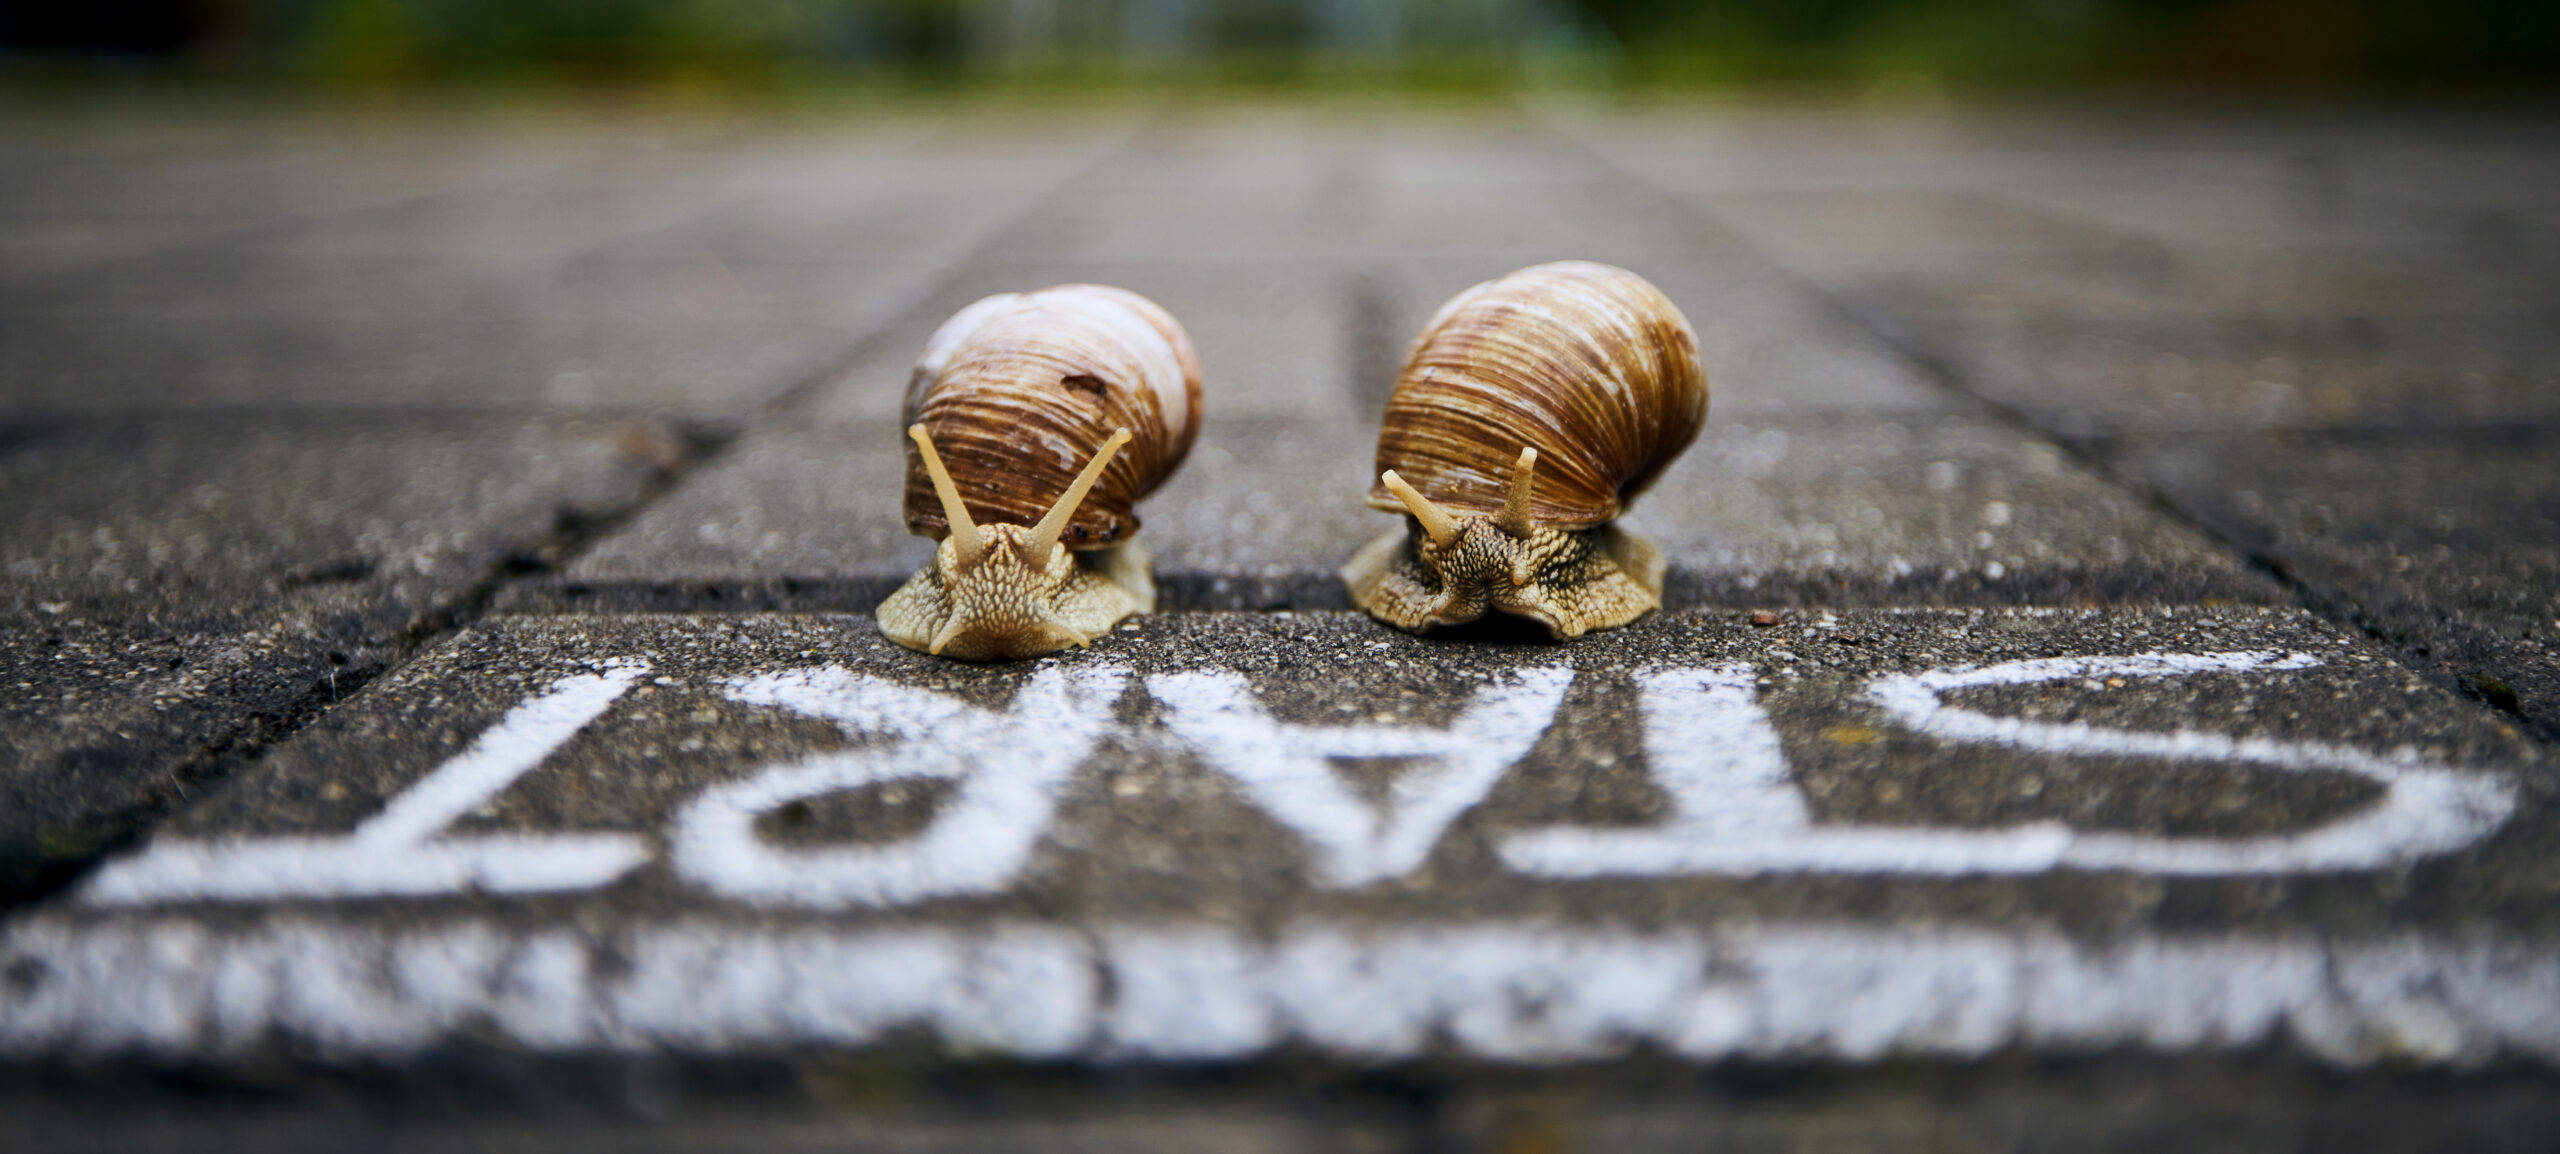 Racing Snails at the start line